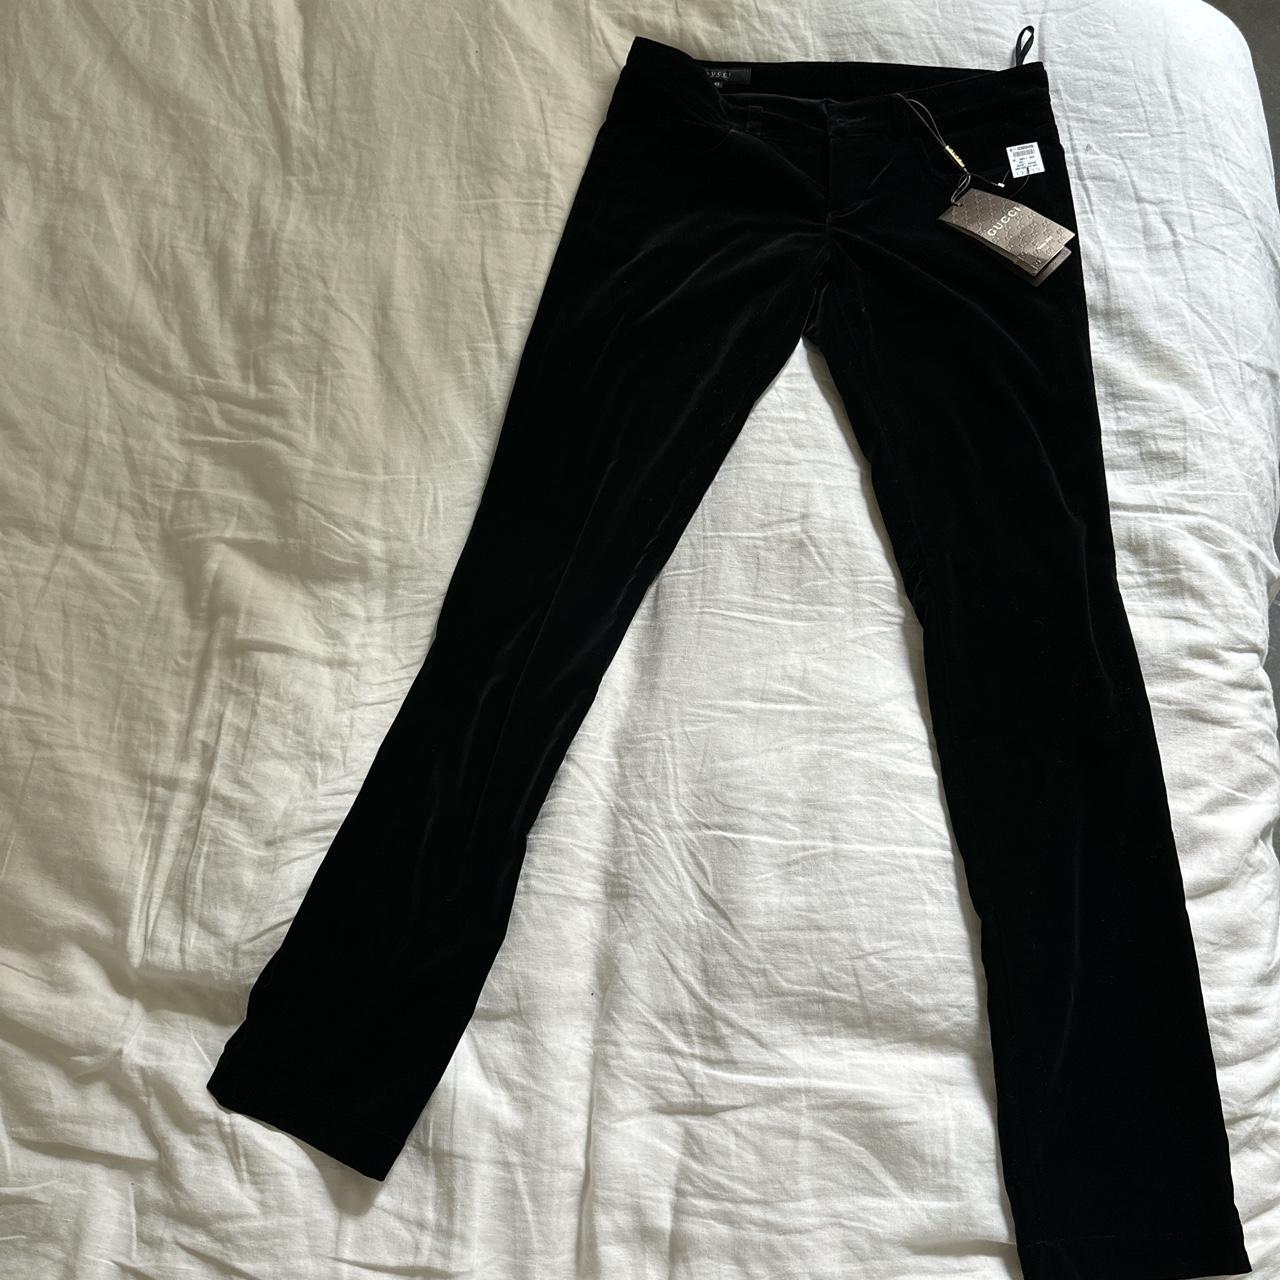 Gucci Gucci Velvet Trousers | Grailed